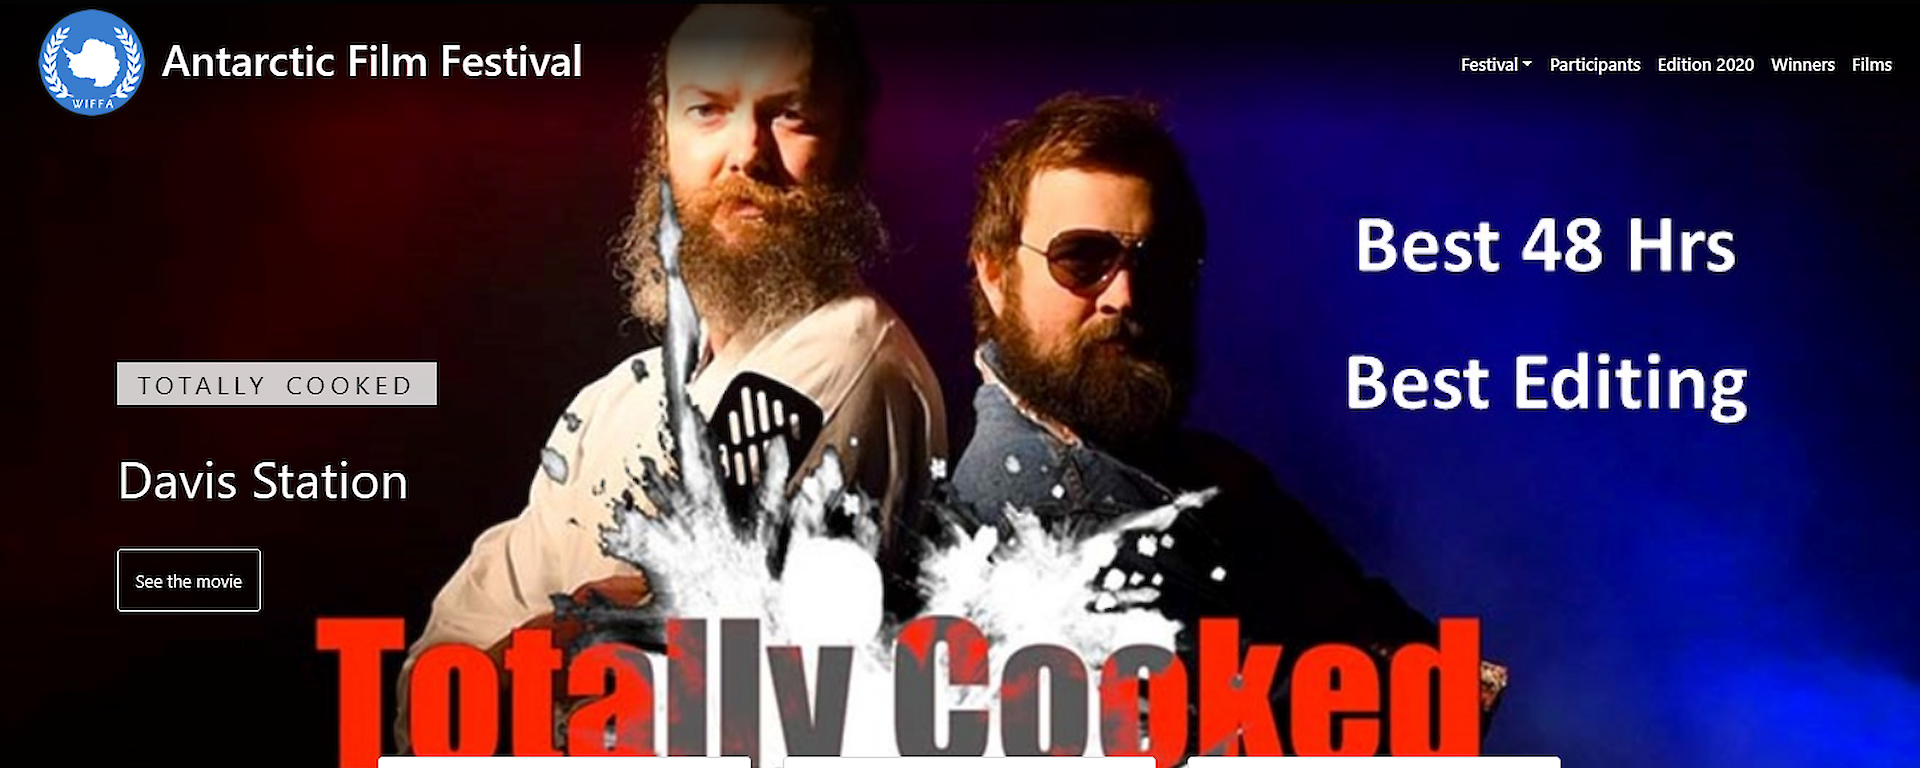 A mock up film poster for Davis' entry "Totally Cooked" featuring two men in costume